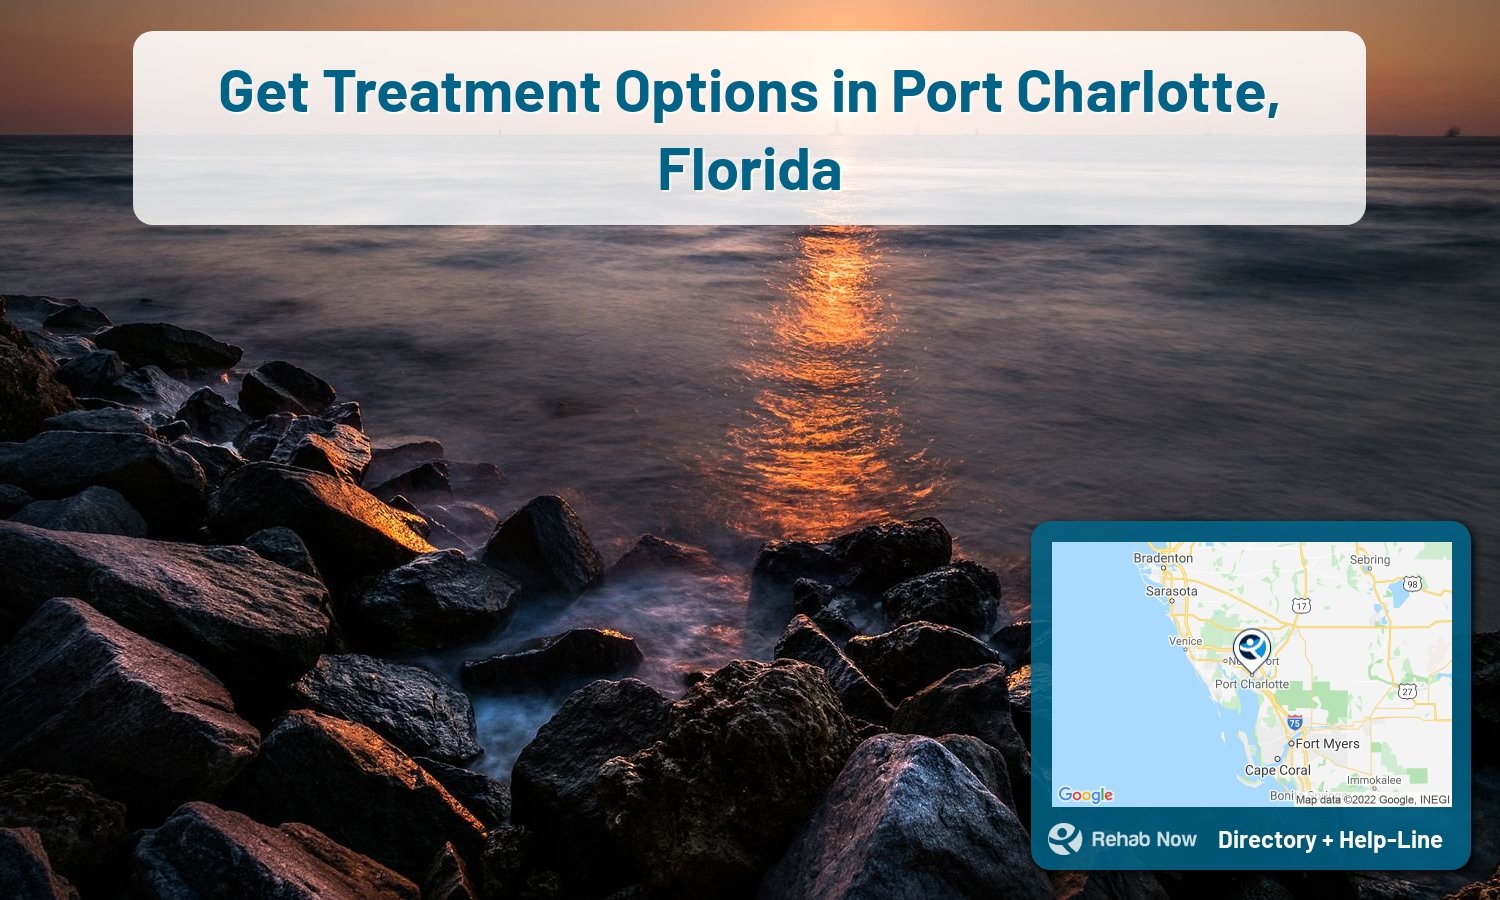 Drug rehab and alcohol treatment services near you in Port Charlotte, Florida. Need help choosing a center? Call us, free.